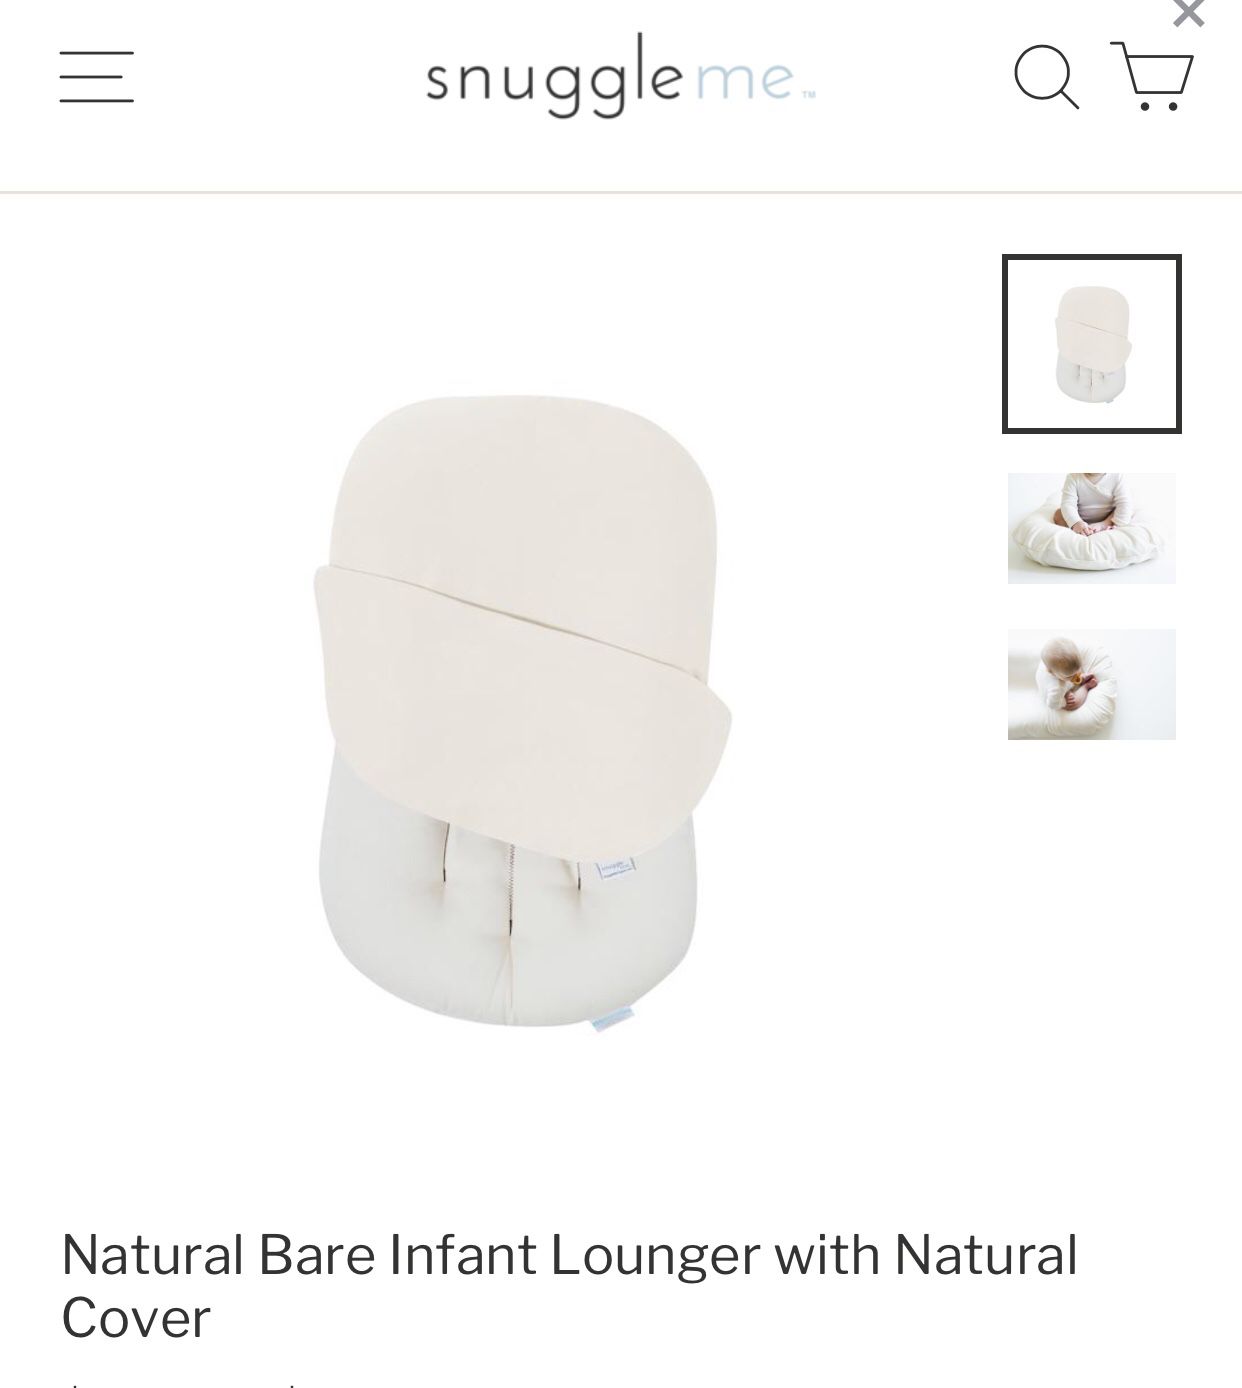 Baby dock a tot snuggle lounger